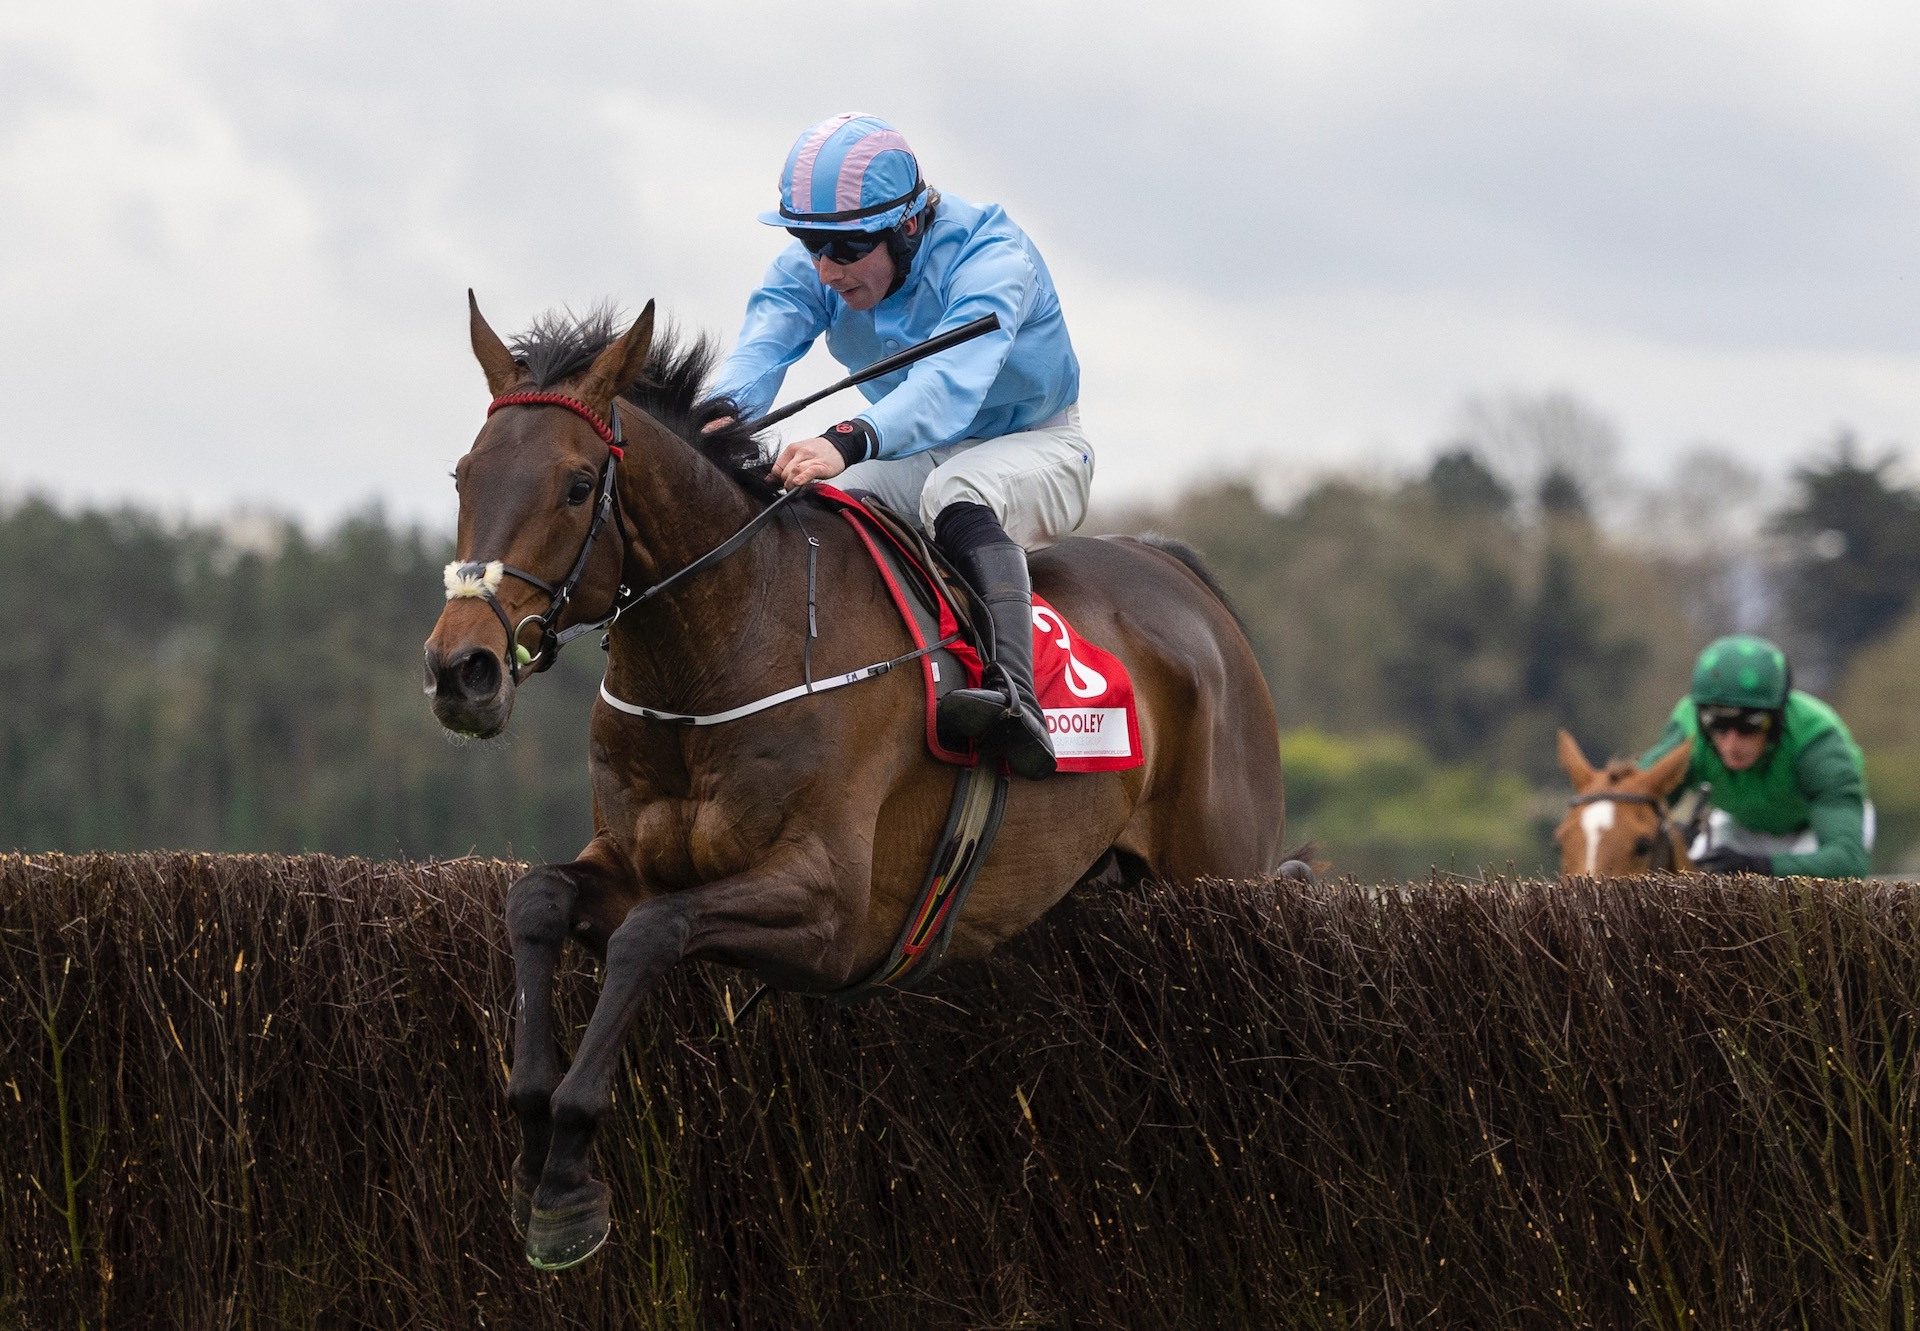 Feronily (Getaway) Wins The Grade 1 Champion Novice Chase At The Punchestown Festival